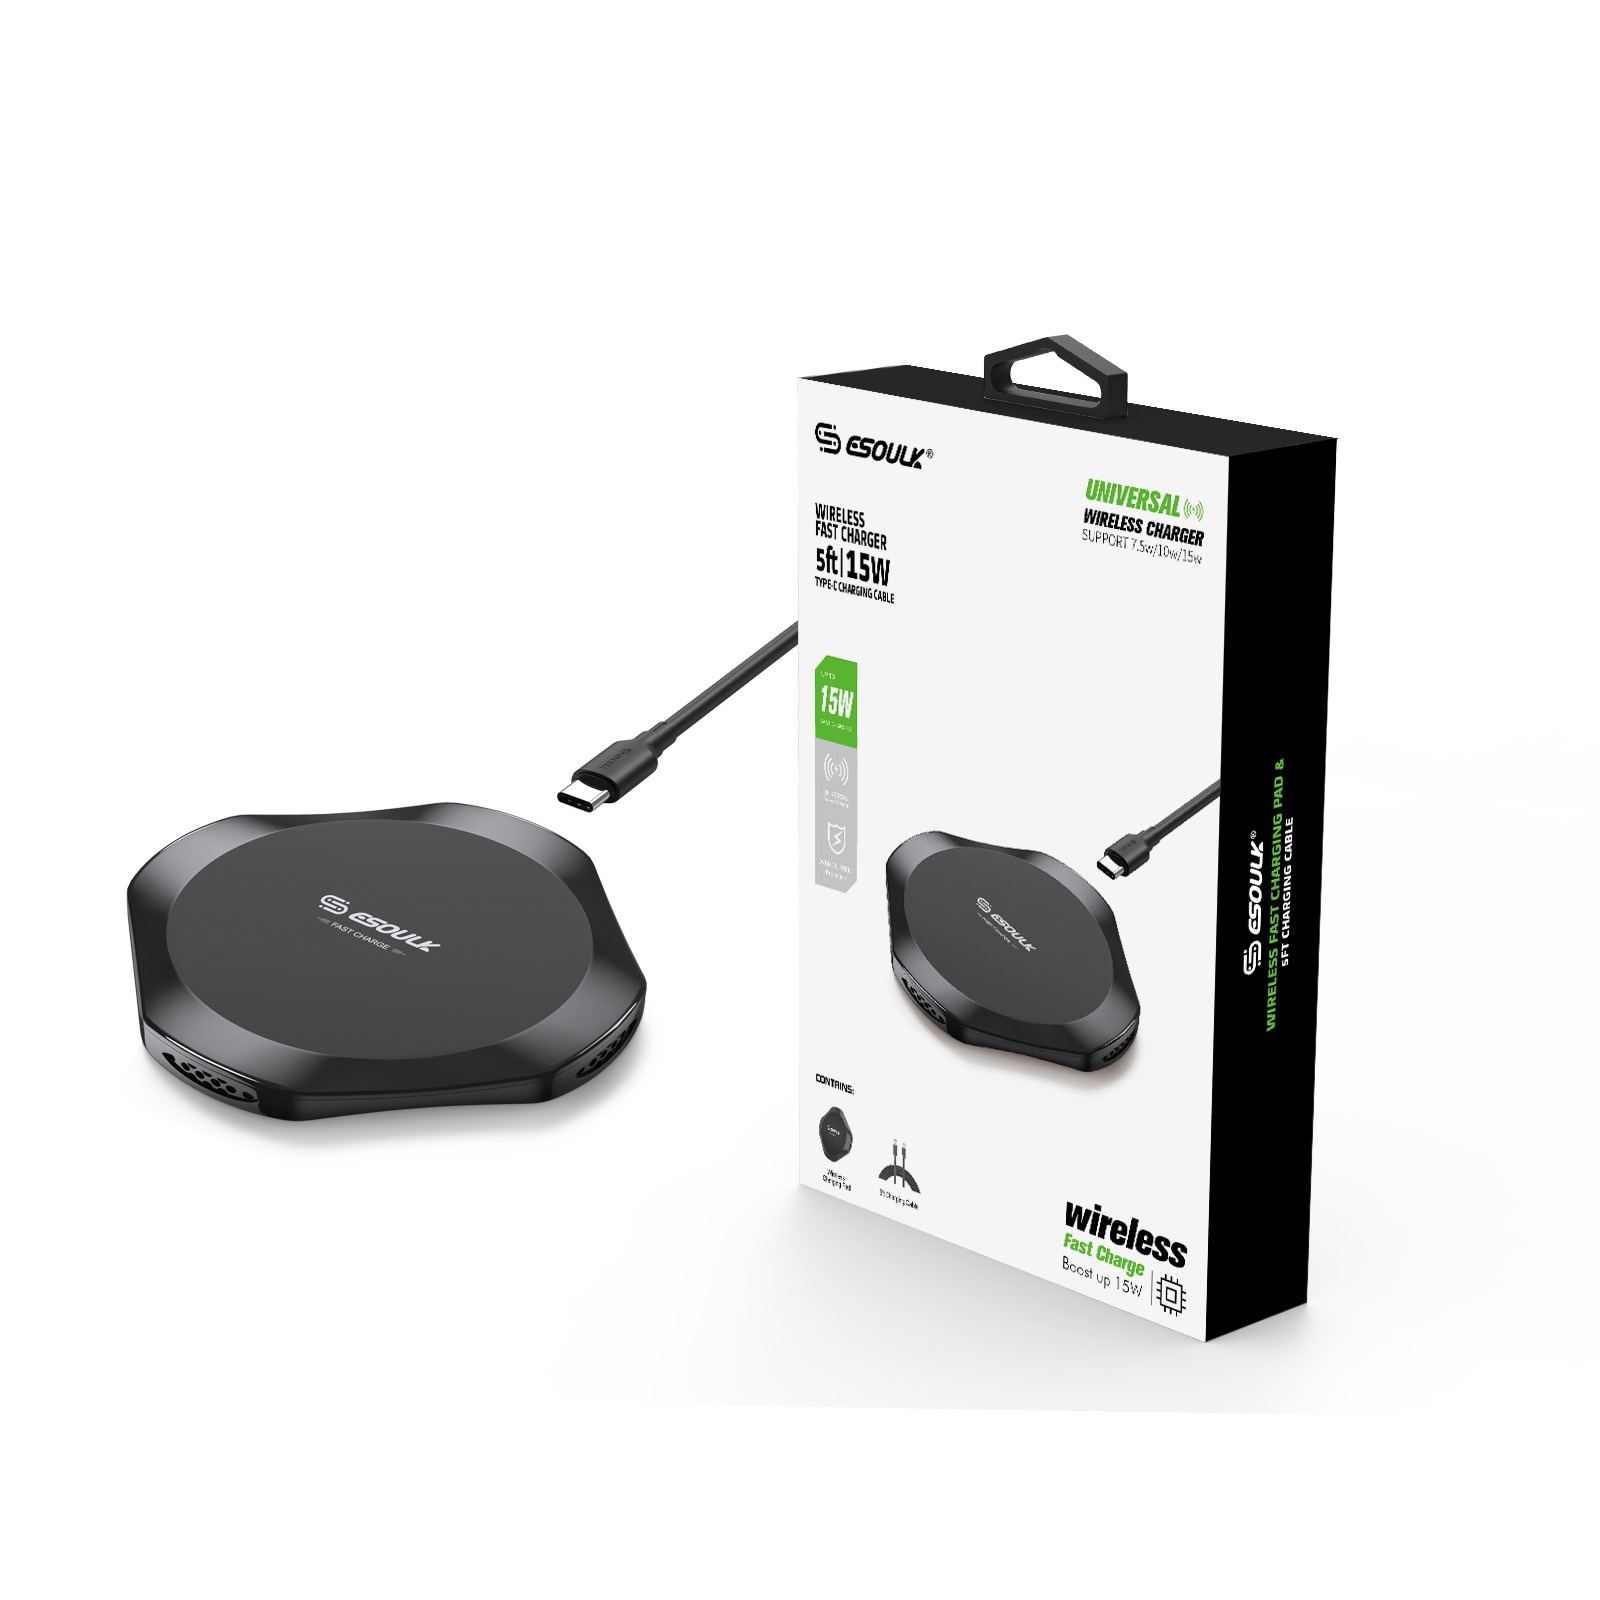 15W Universal Wireless Charger 157